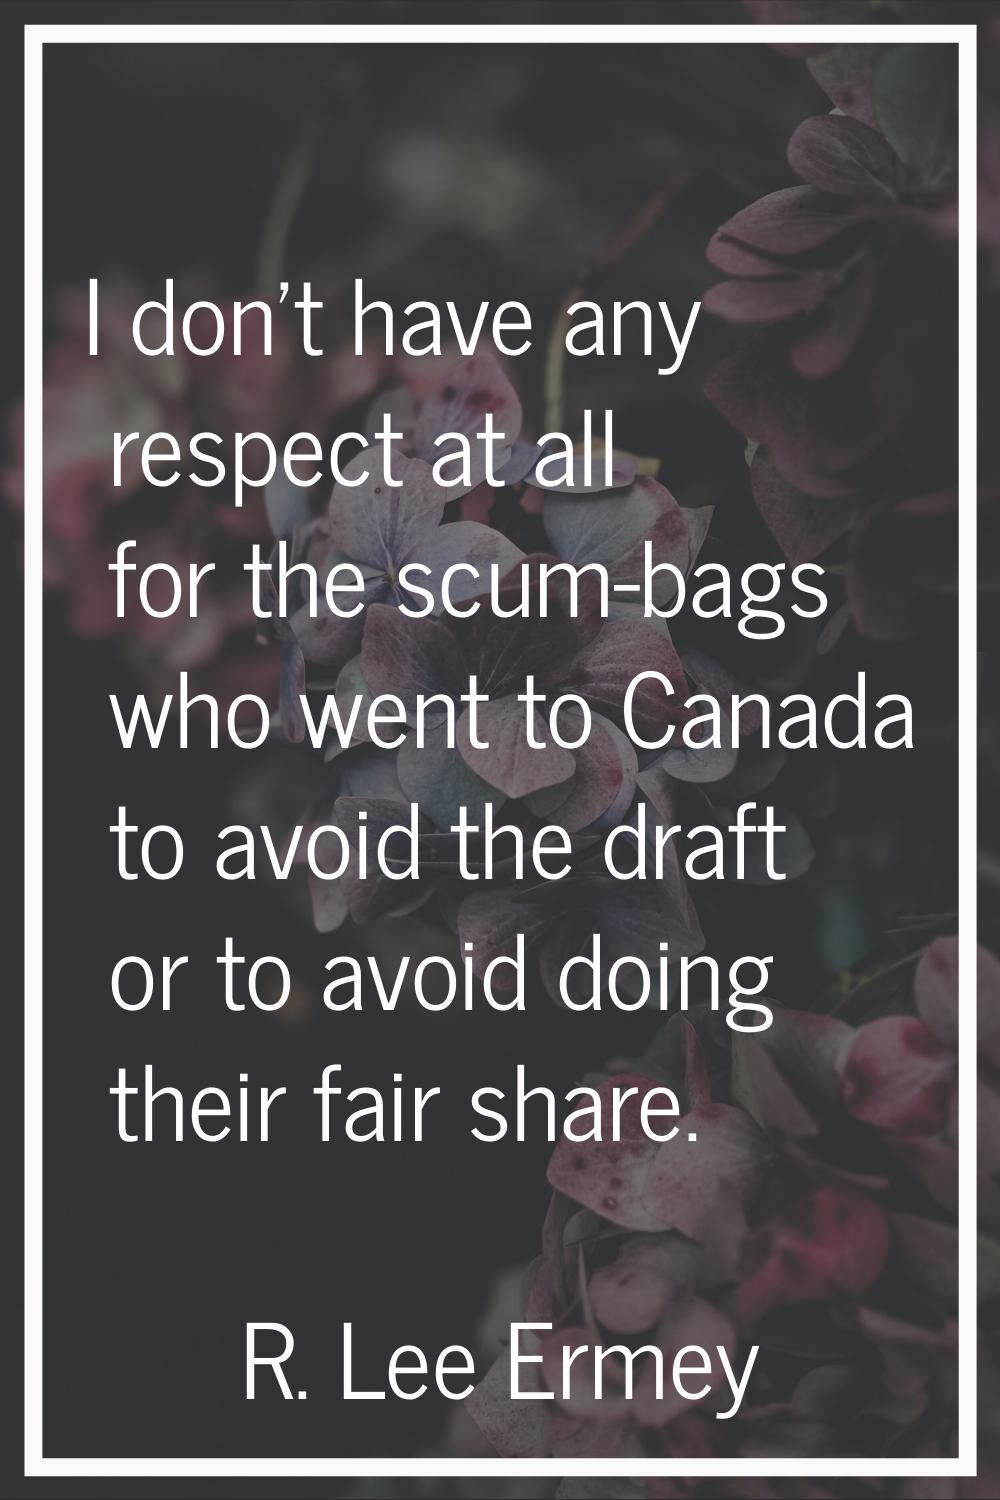 I don't have any respect at all for the scum-bags who went to Canada to avoid the draft or to avoid